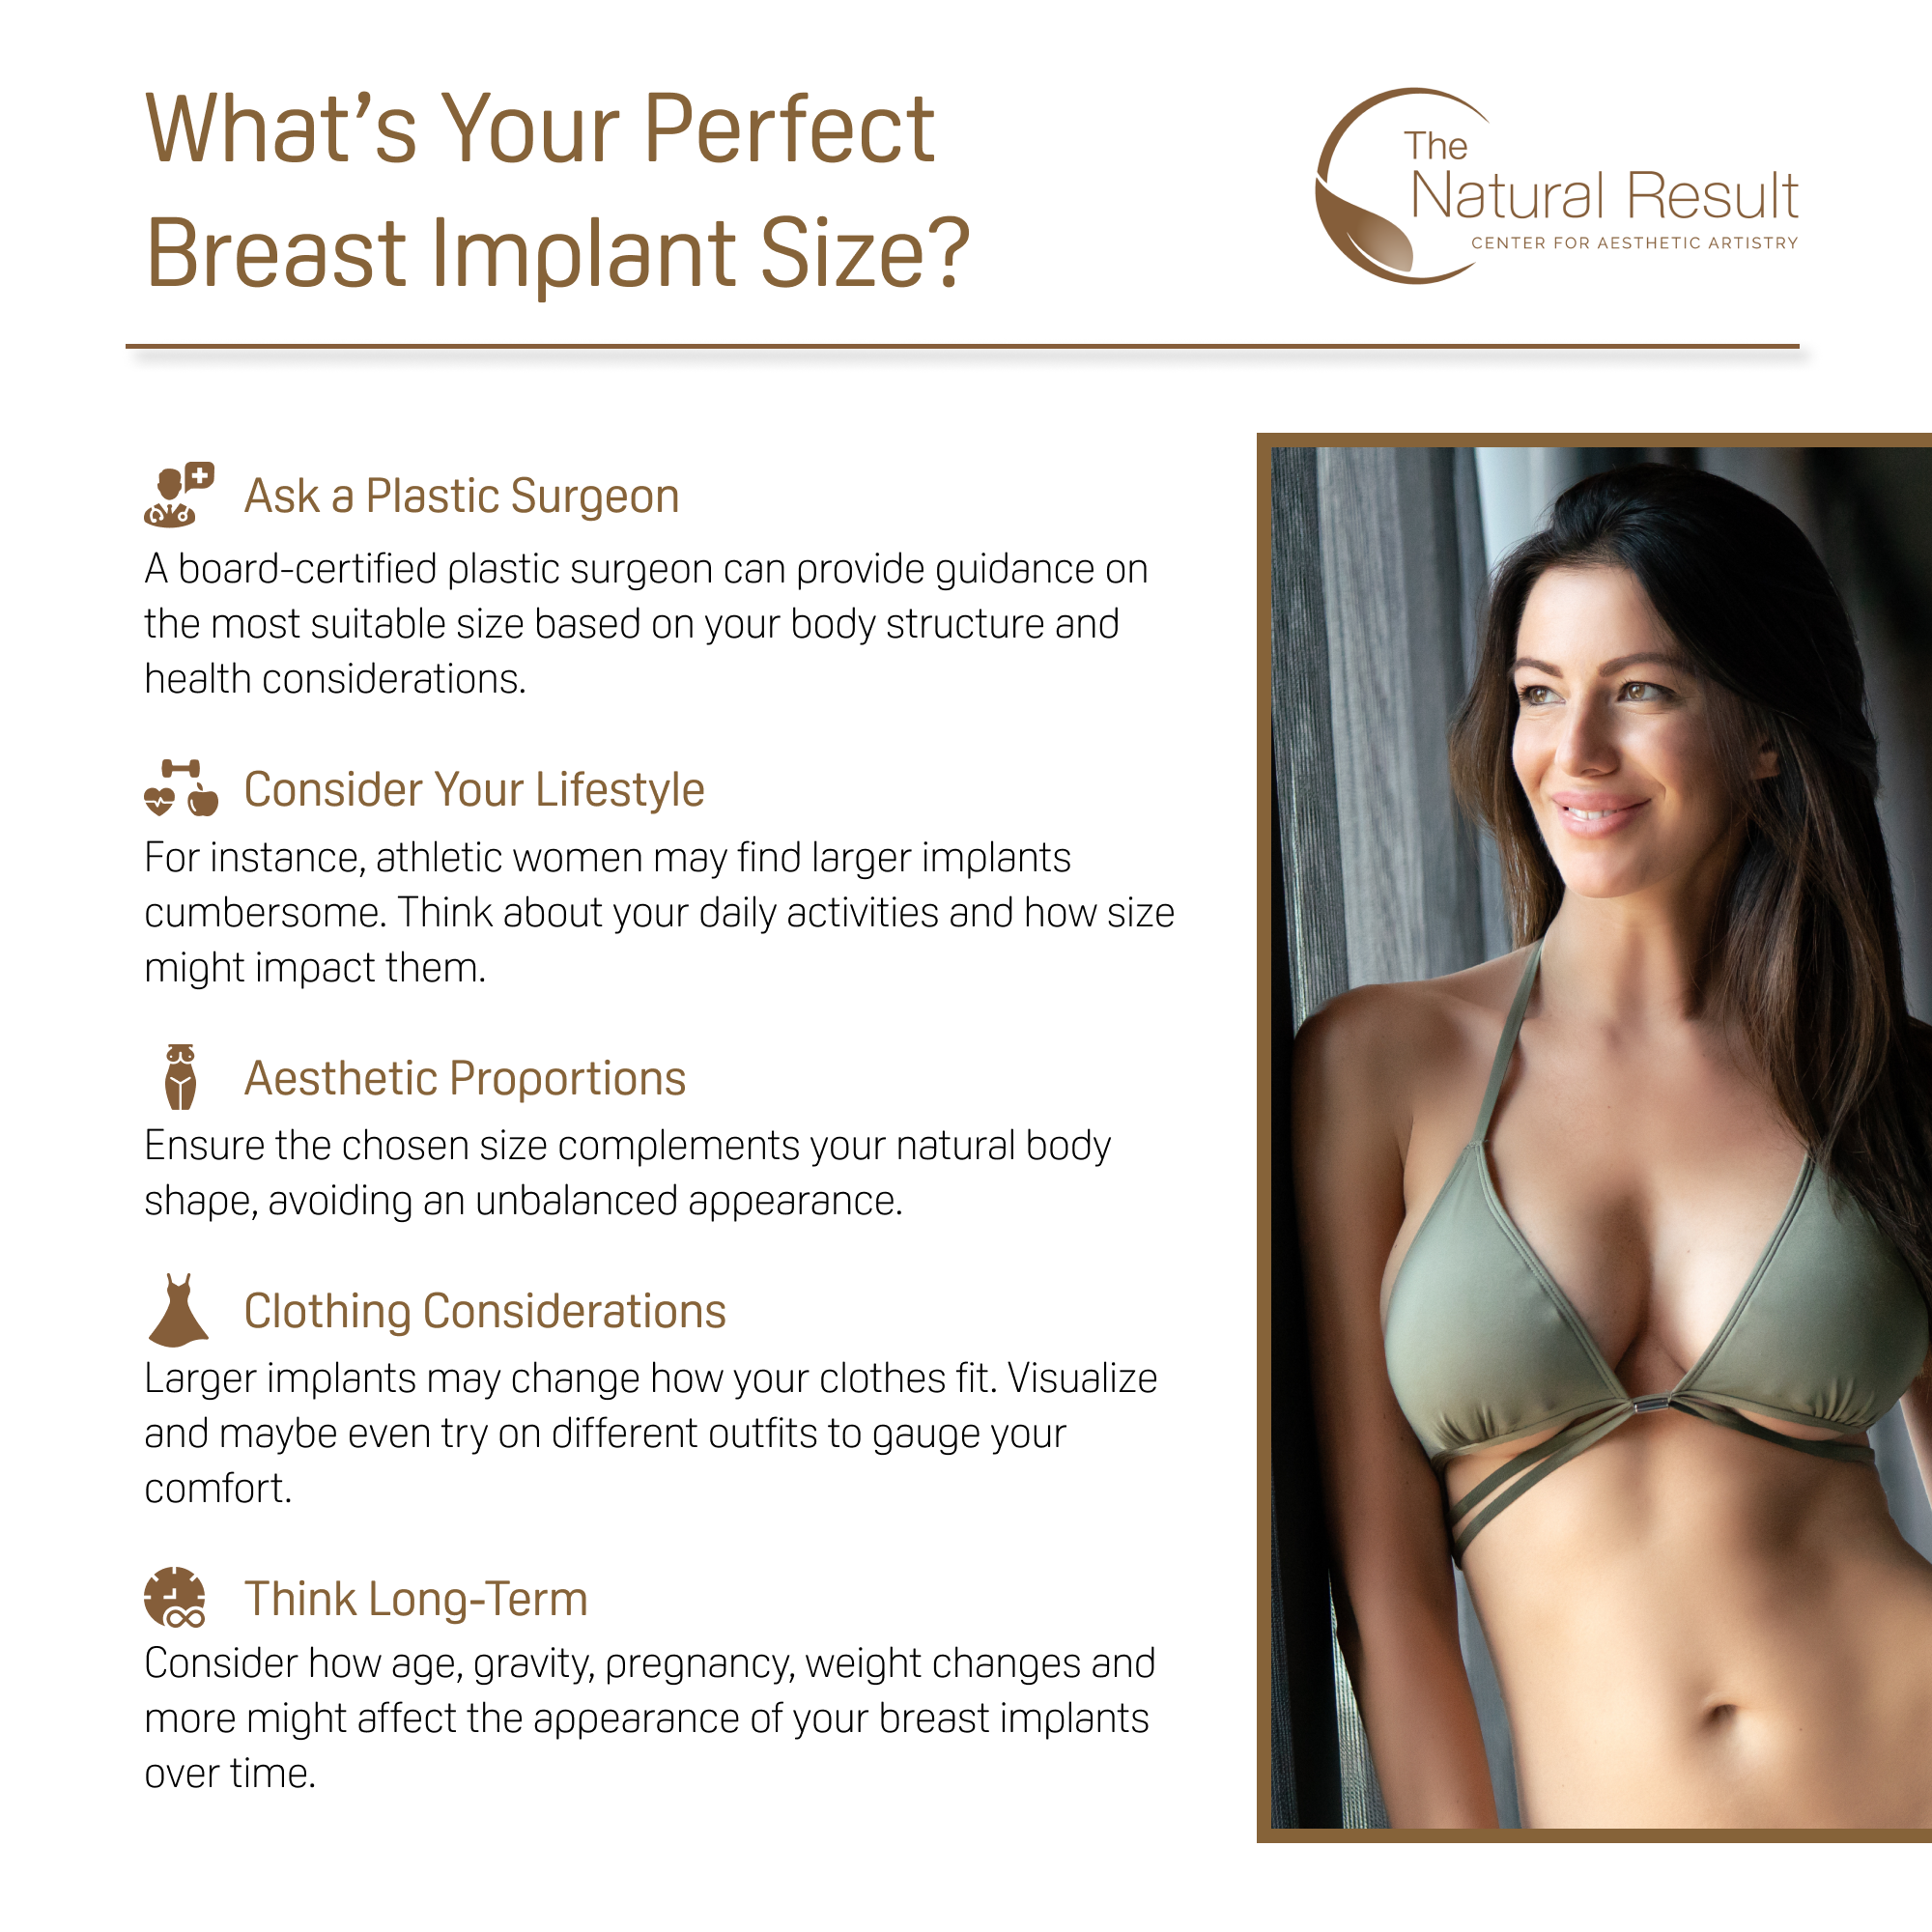 Changing the Size of Your Implants with Breast Revision